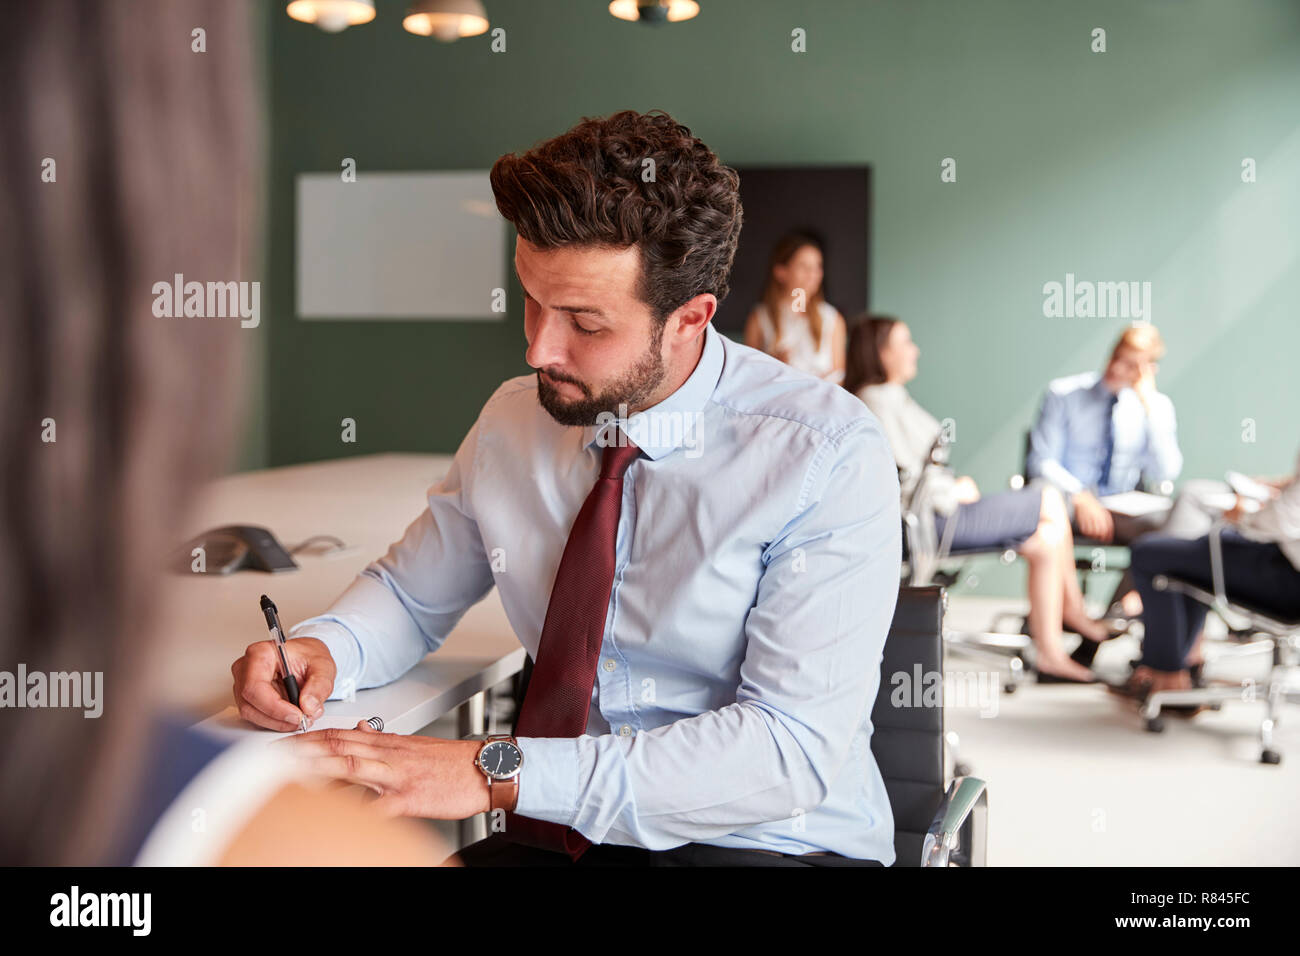 Businesswoman And Businessman Collaborating On Task Together At Graduate Recruitment Assessment Day Stock Photo